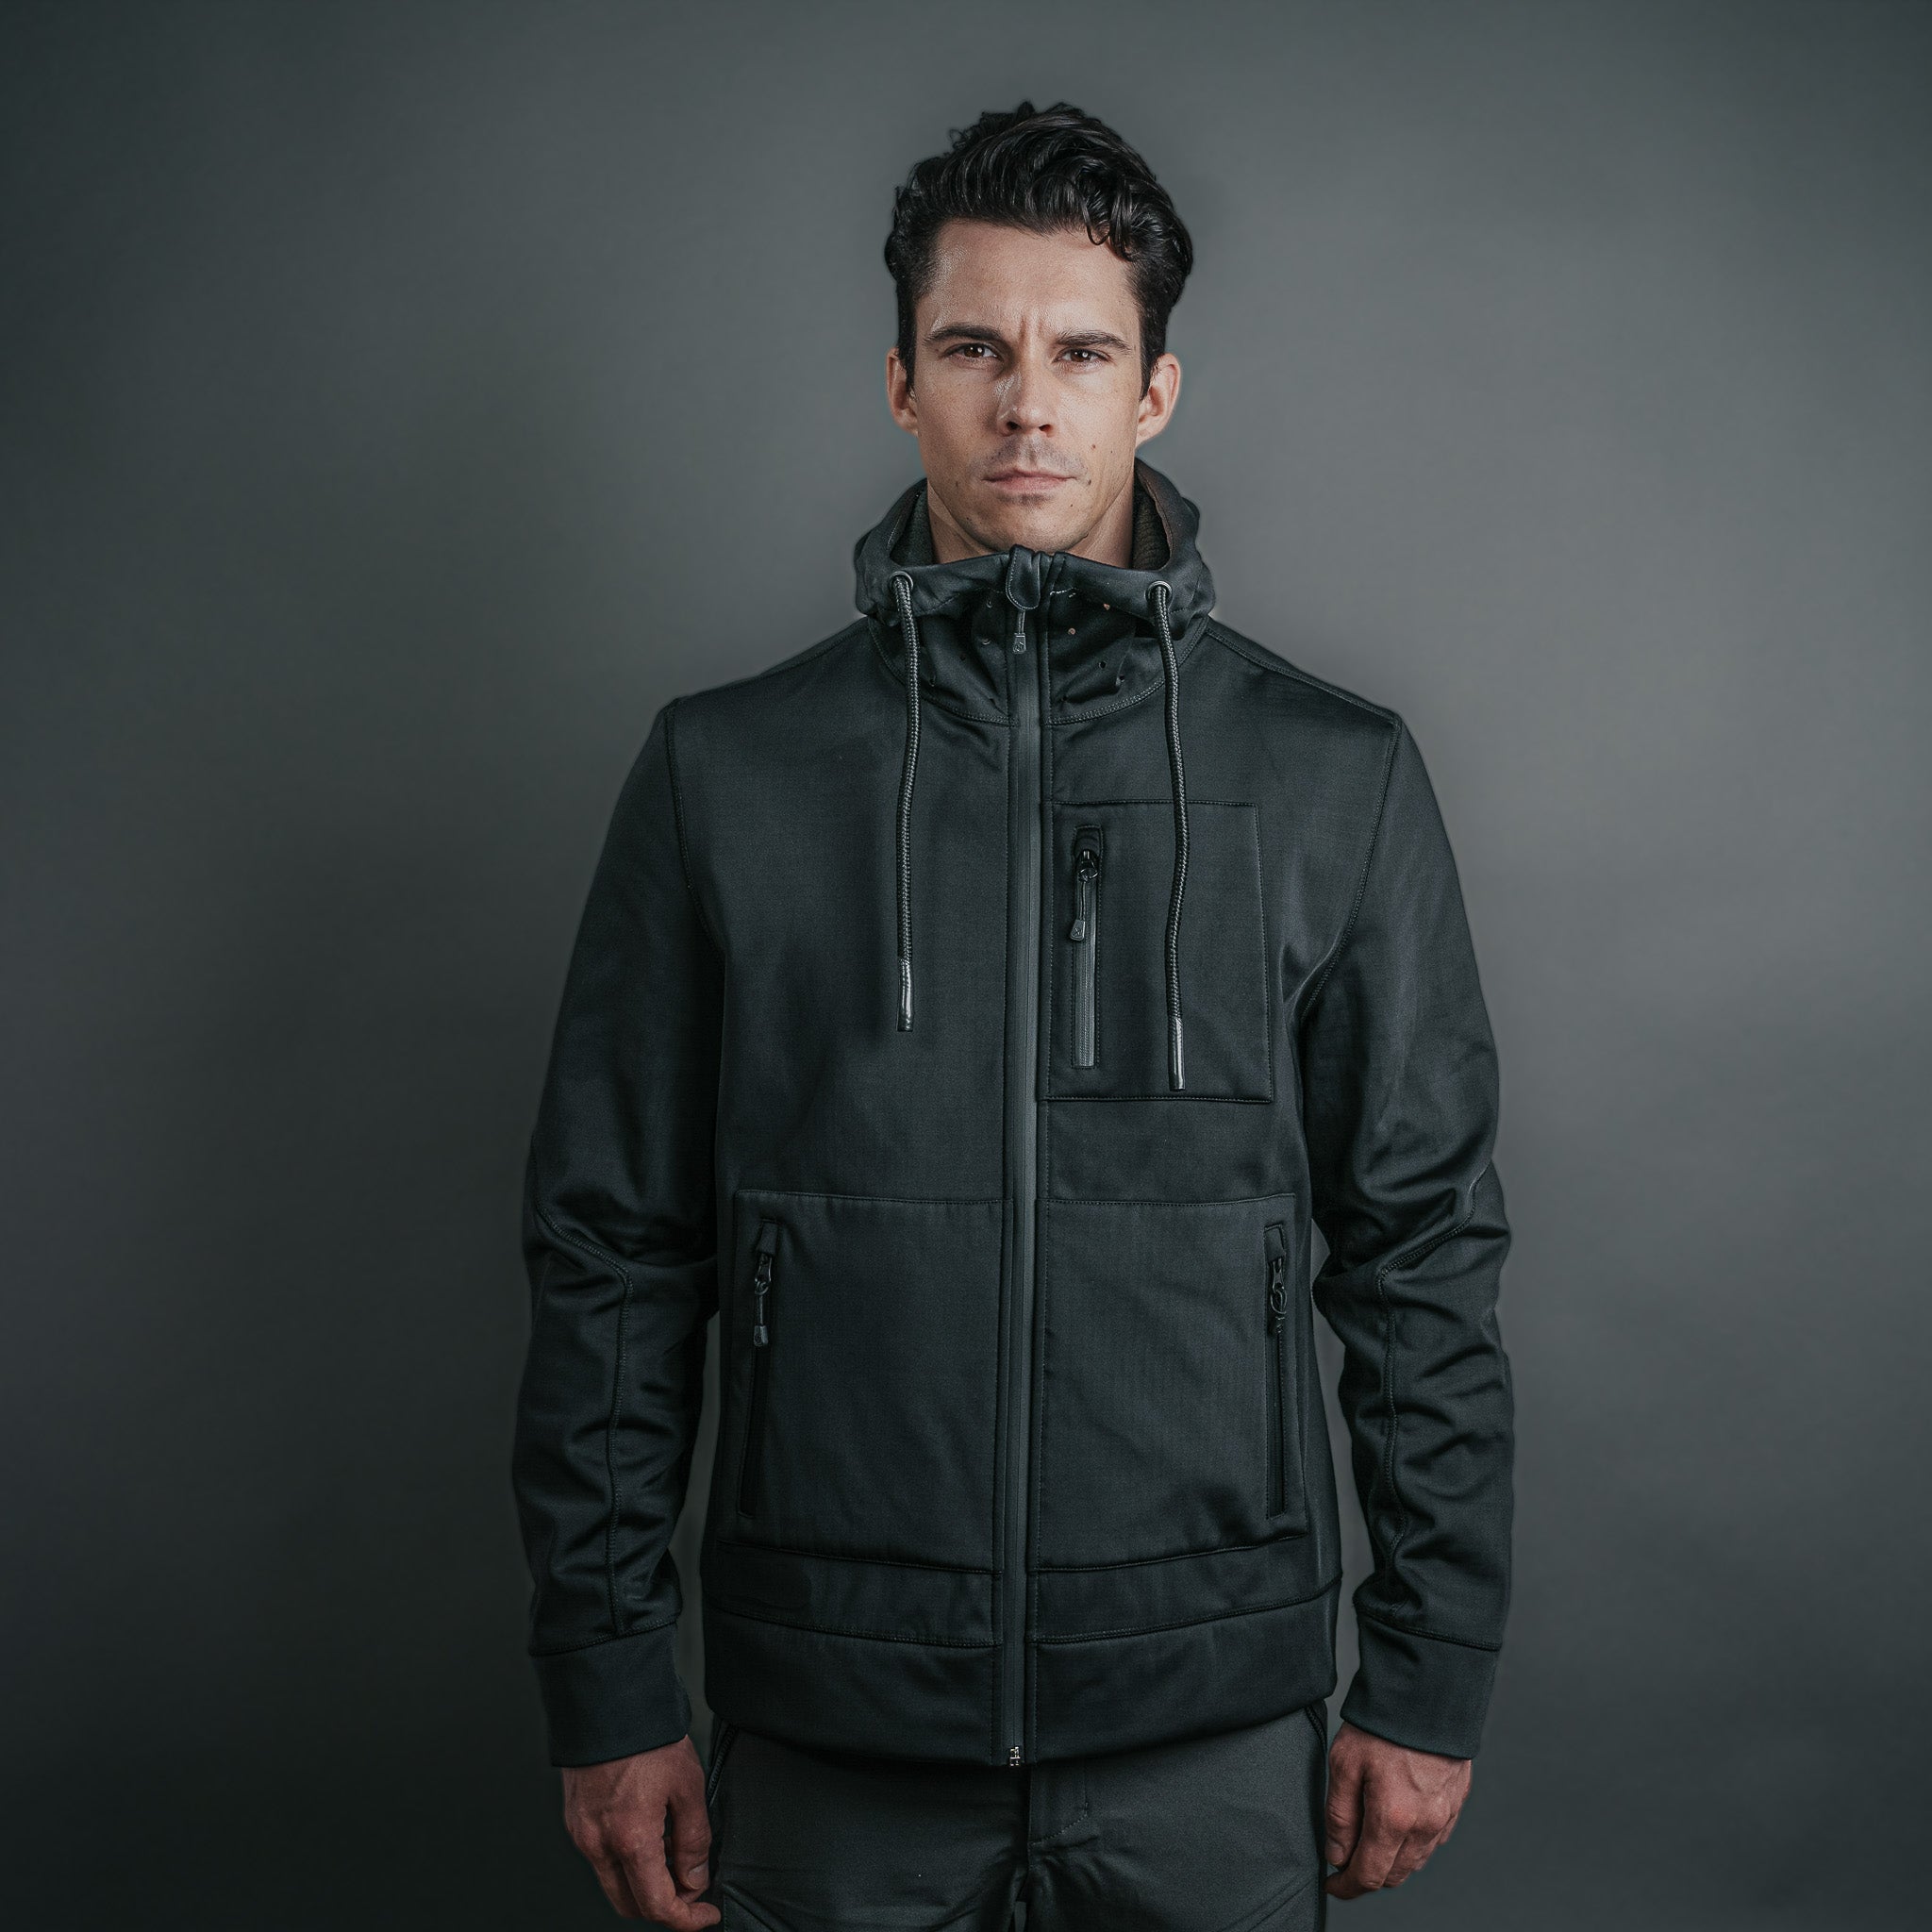 Emerging Gear: New YETI Color, Coffee Straw, Graphene Jacket, and